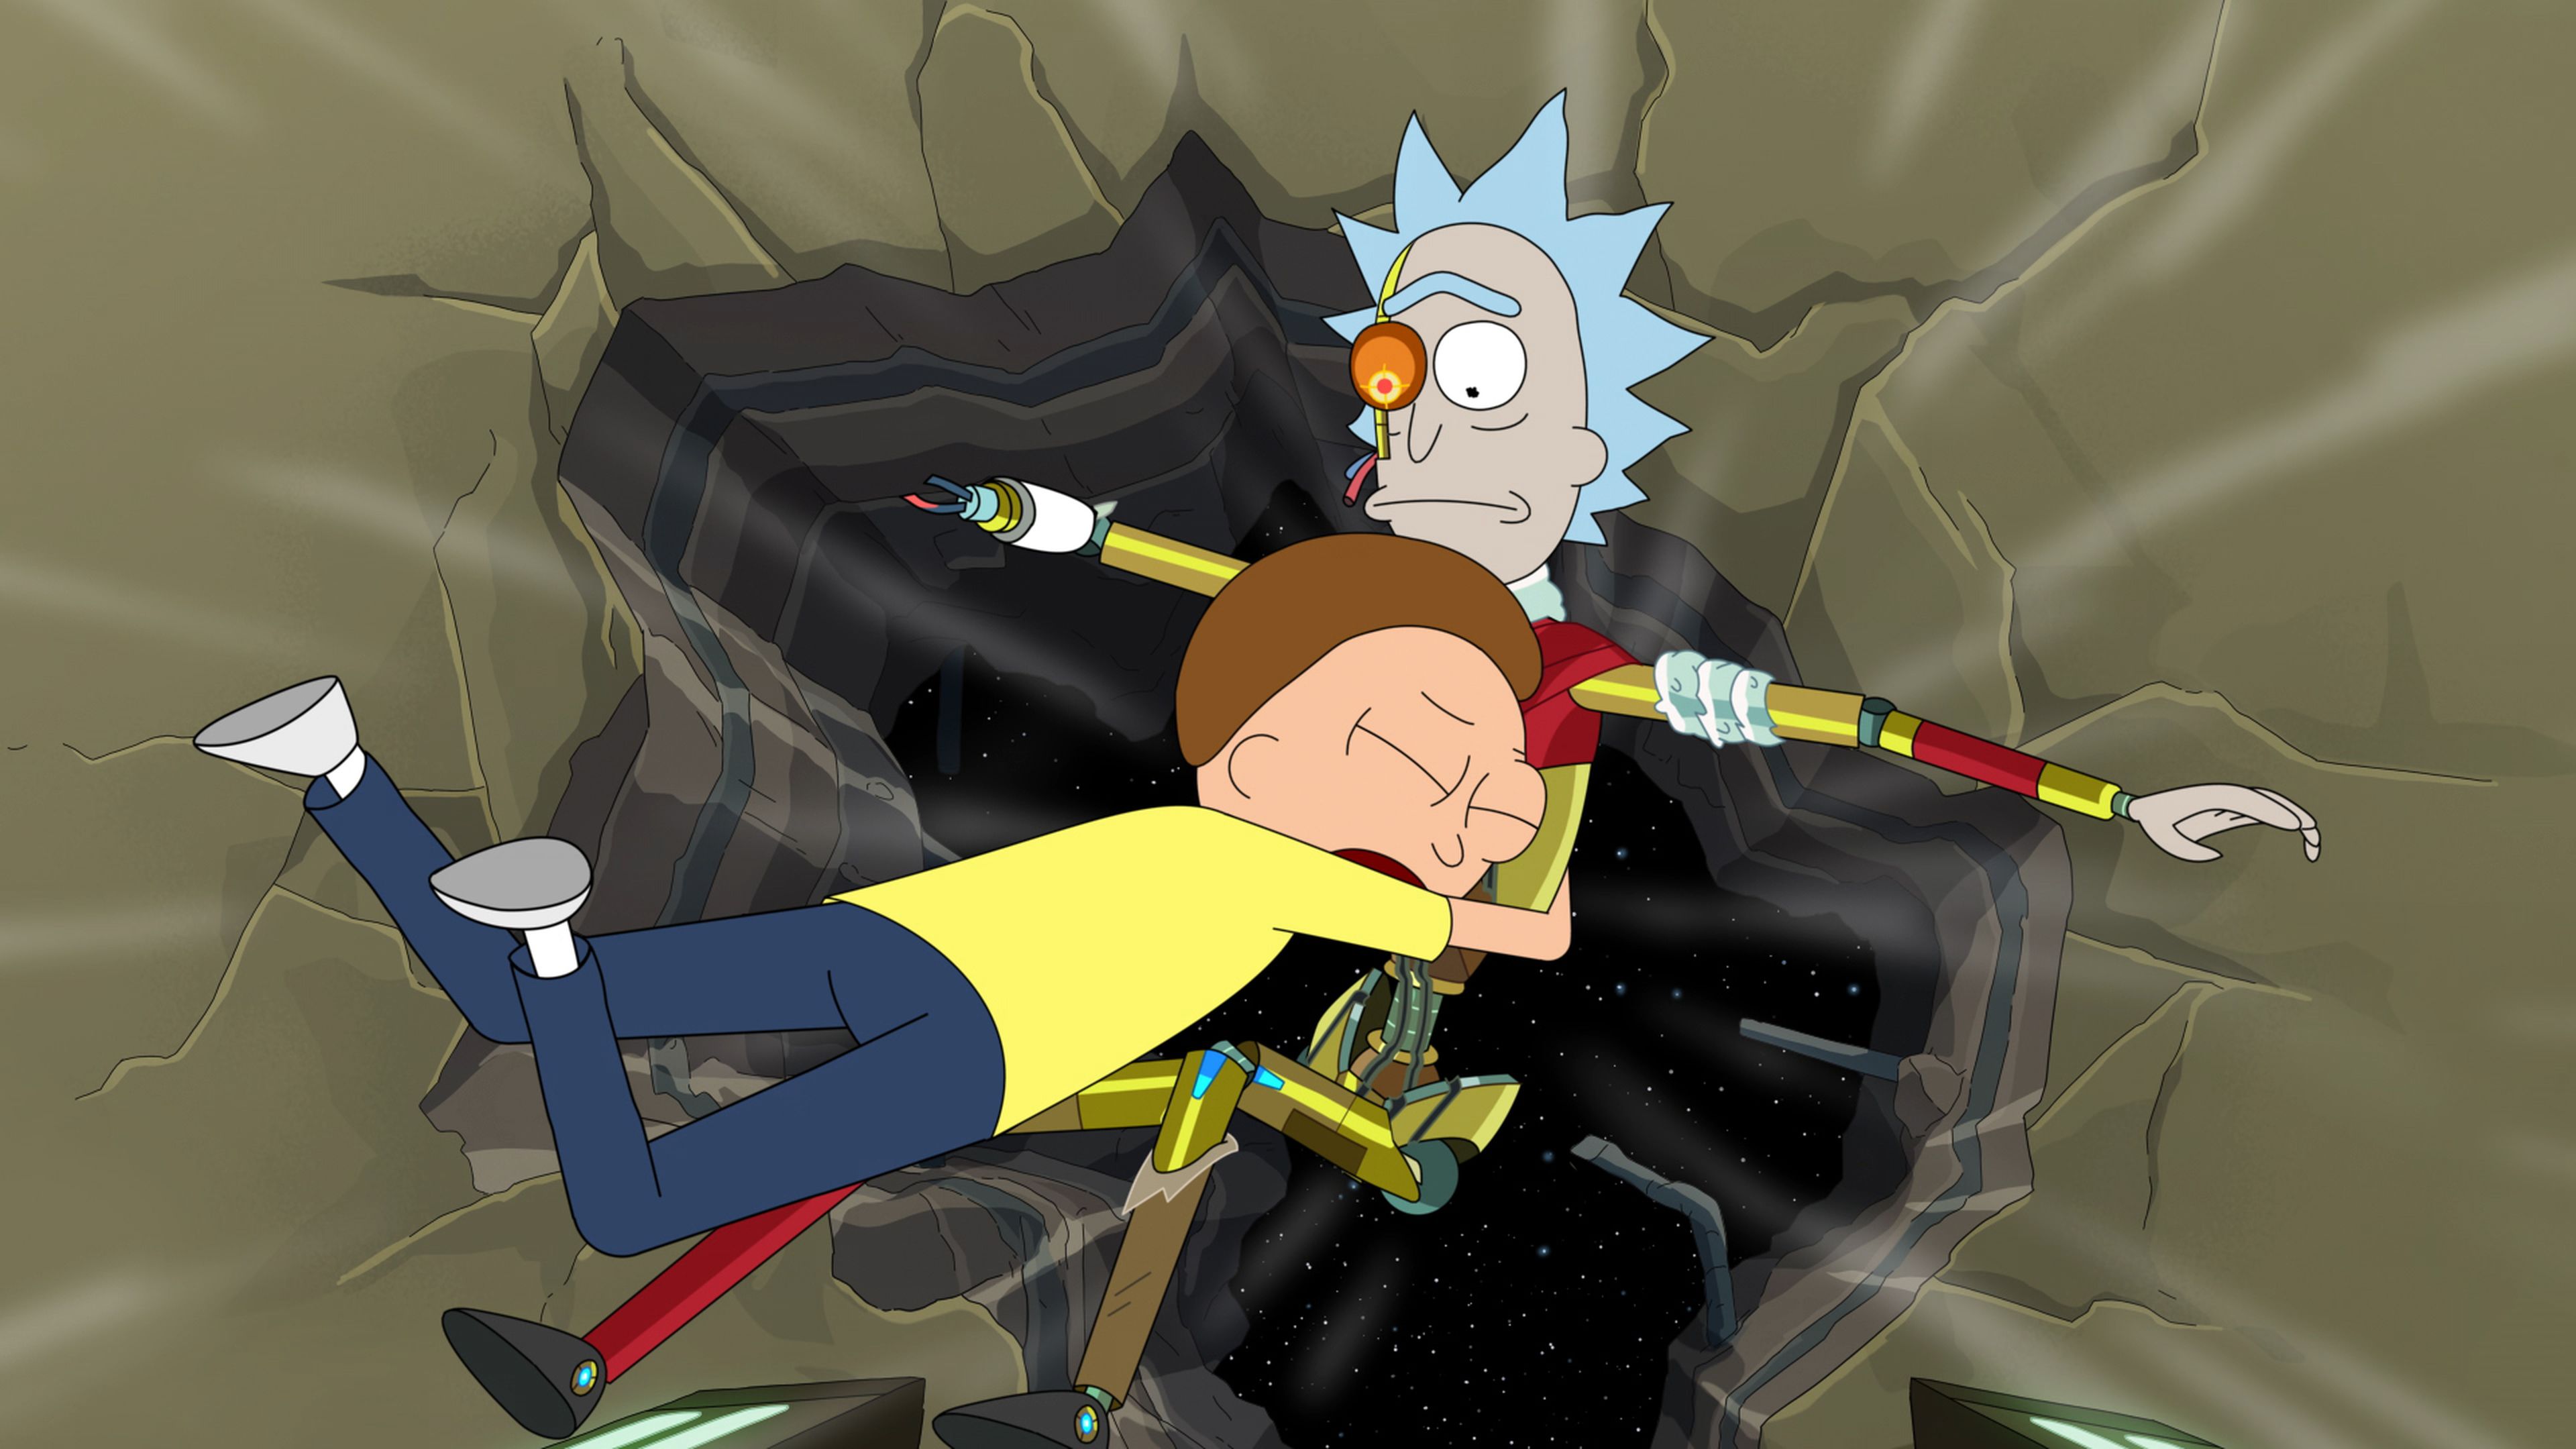 Rick and Morty season 7 date announced!